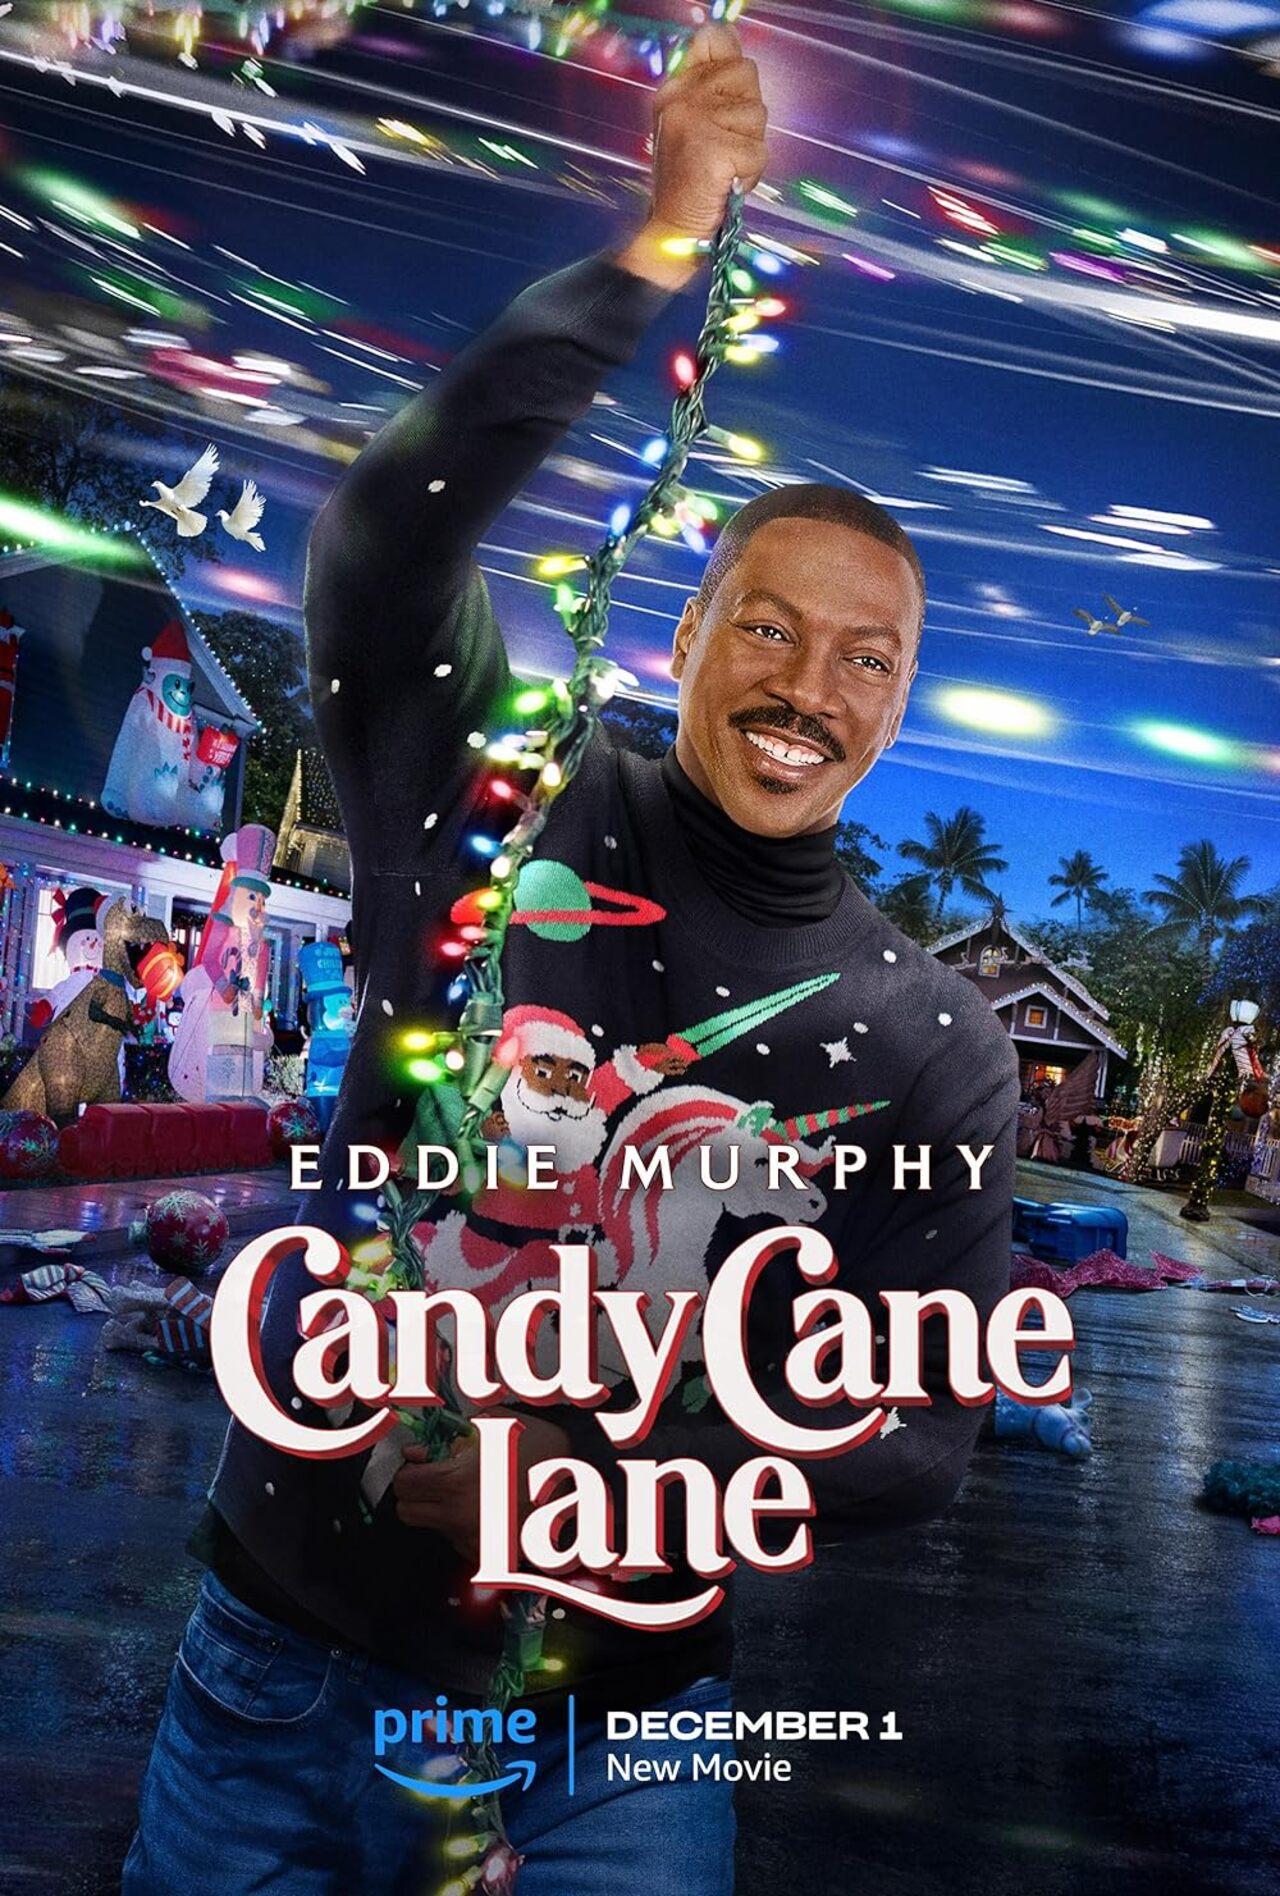 Candy Cane Lane is a Christmas film releasing on Amazon Prime Video on December 1, 2023. It is about a person named Chris who desires to win the contest for the best-decorated home for Christmas, and seeks help from stranger to use his magic to make his house look stunning